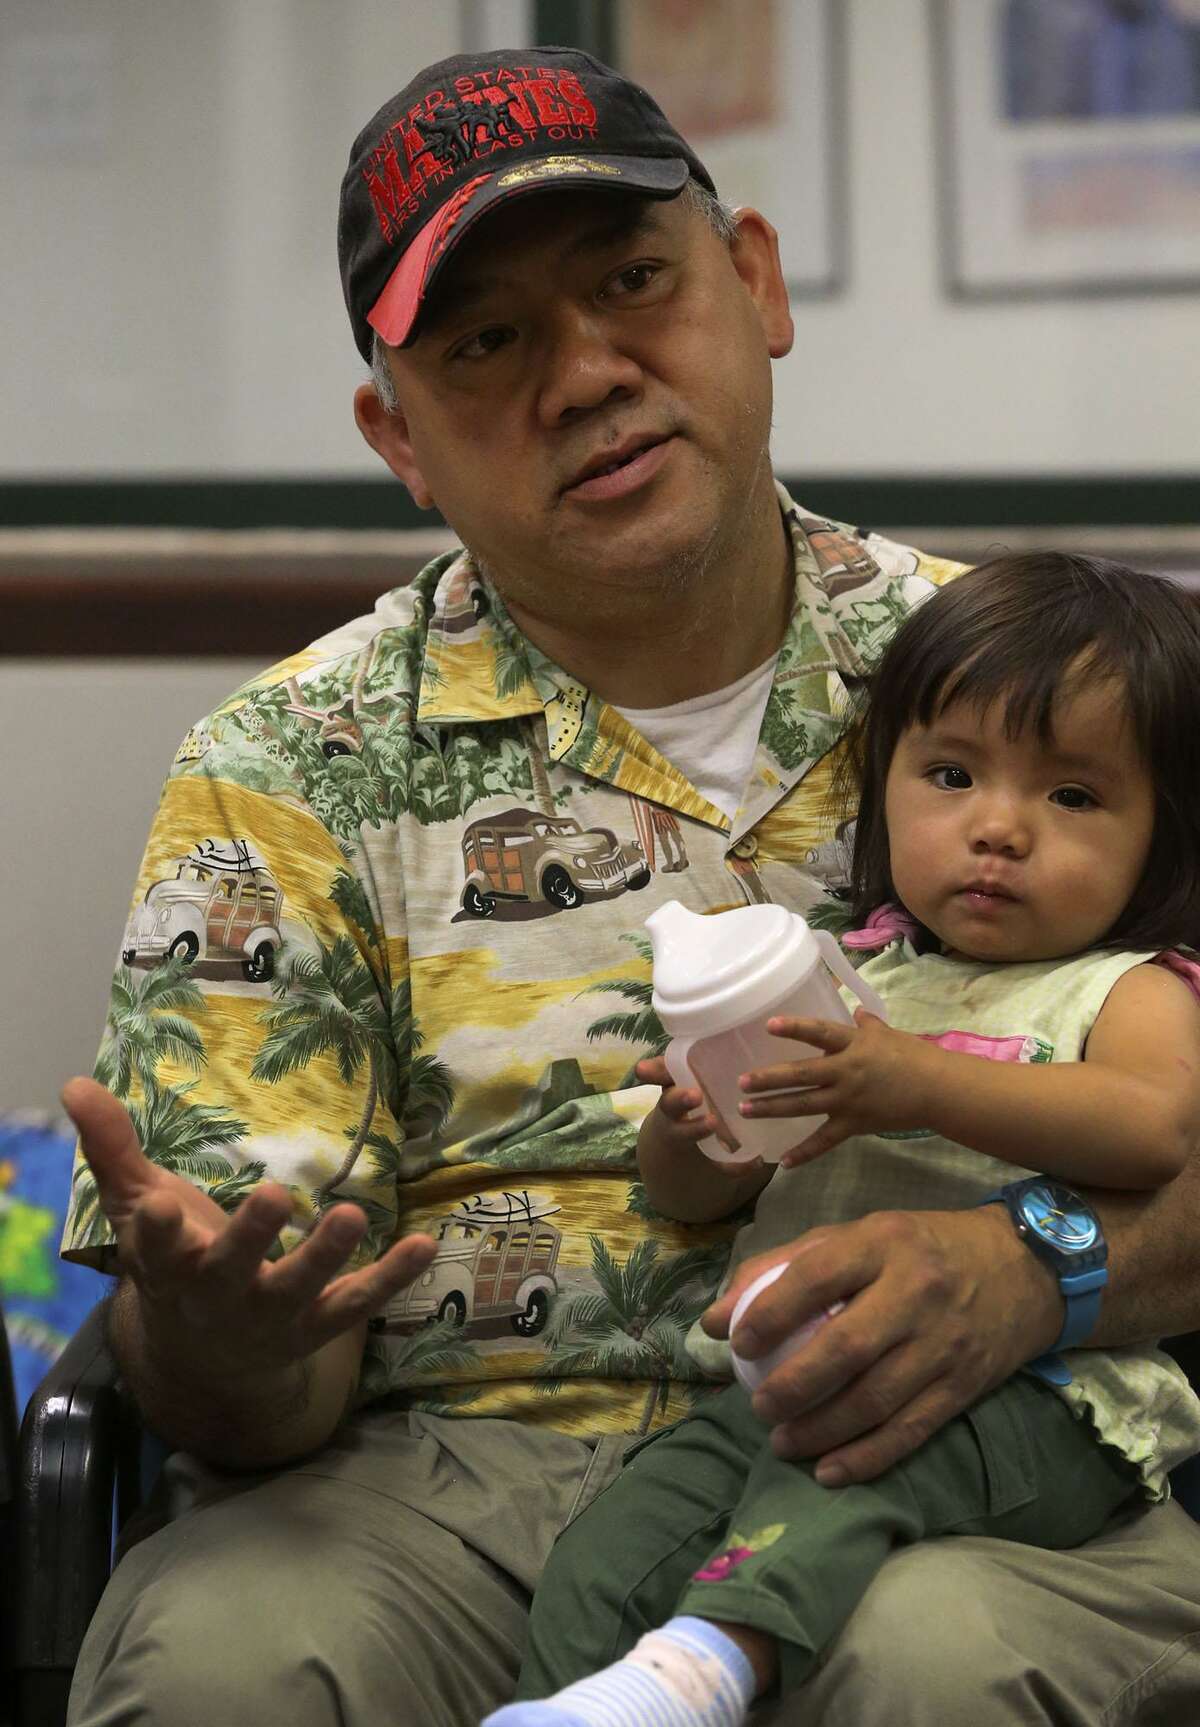 Veteran Eli Lequang is a widower whose wife died at the age of 34 when she was giving birth to his daughter Kayleen, 1. The Children's Shelter is offering new programs that are helping Lequang and other active or retired military who are in similar situations.